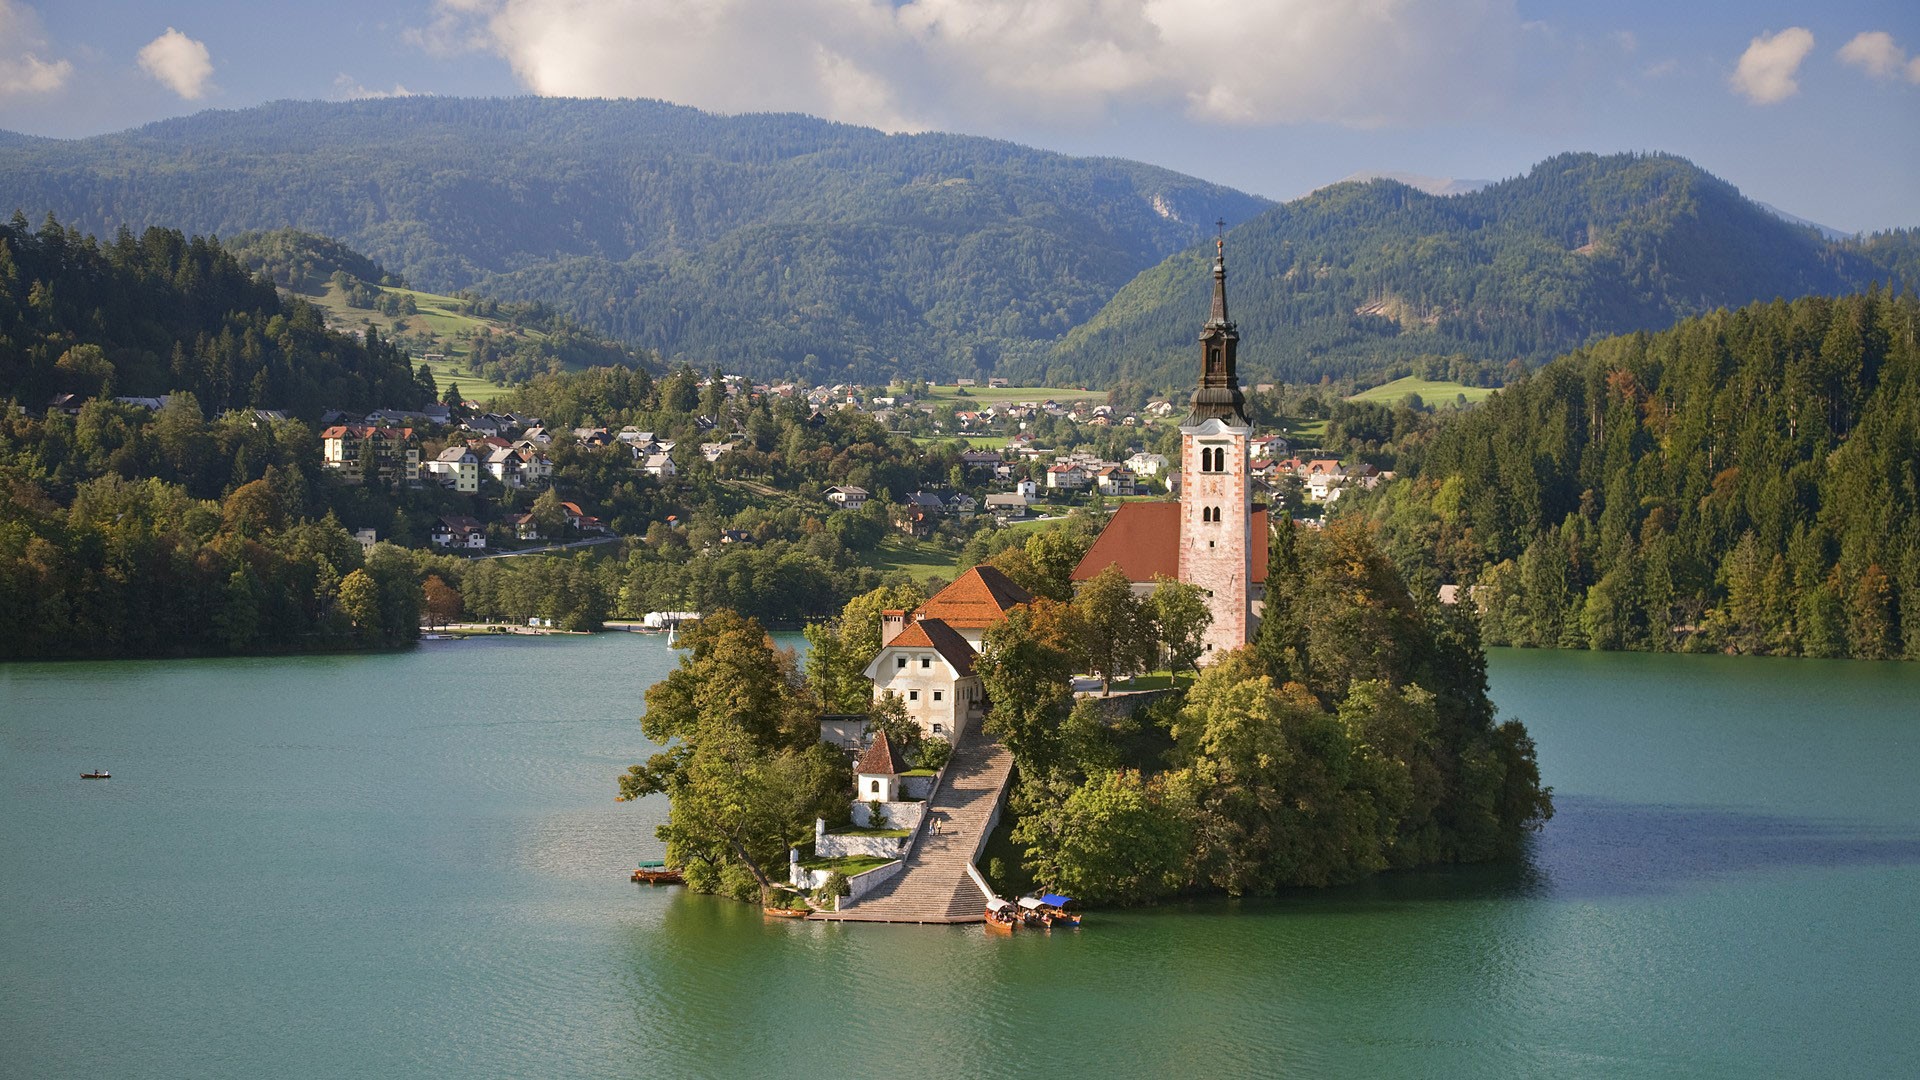 General 1920x1080 island Lake Bled Slovenia church outdoors building landscape